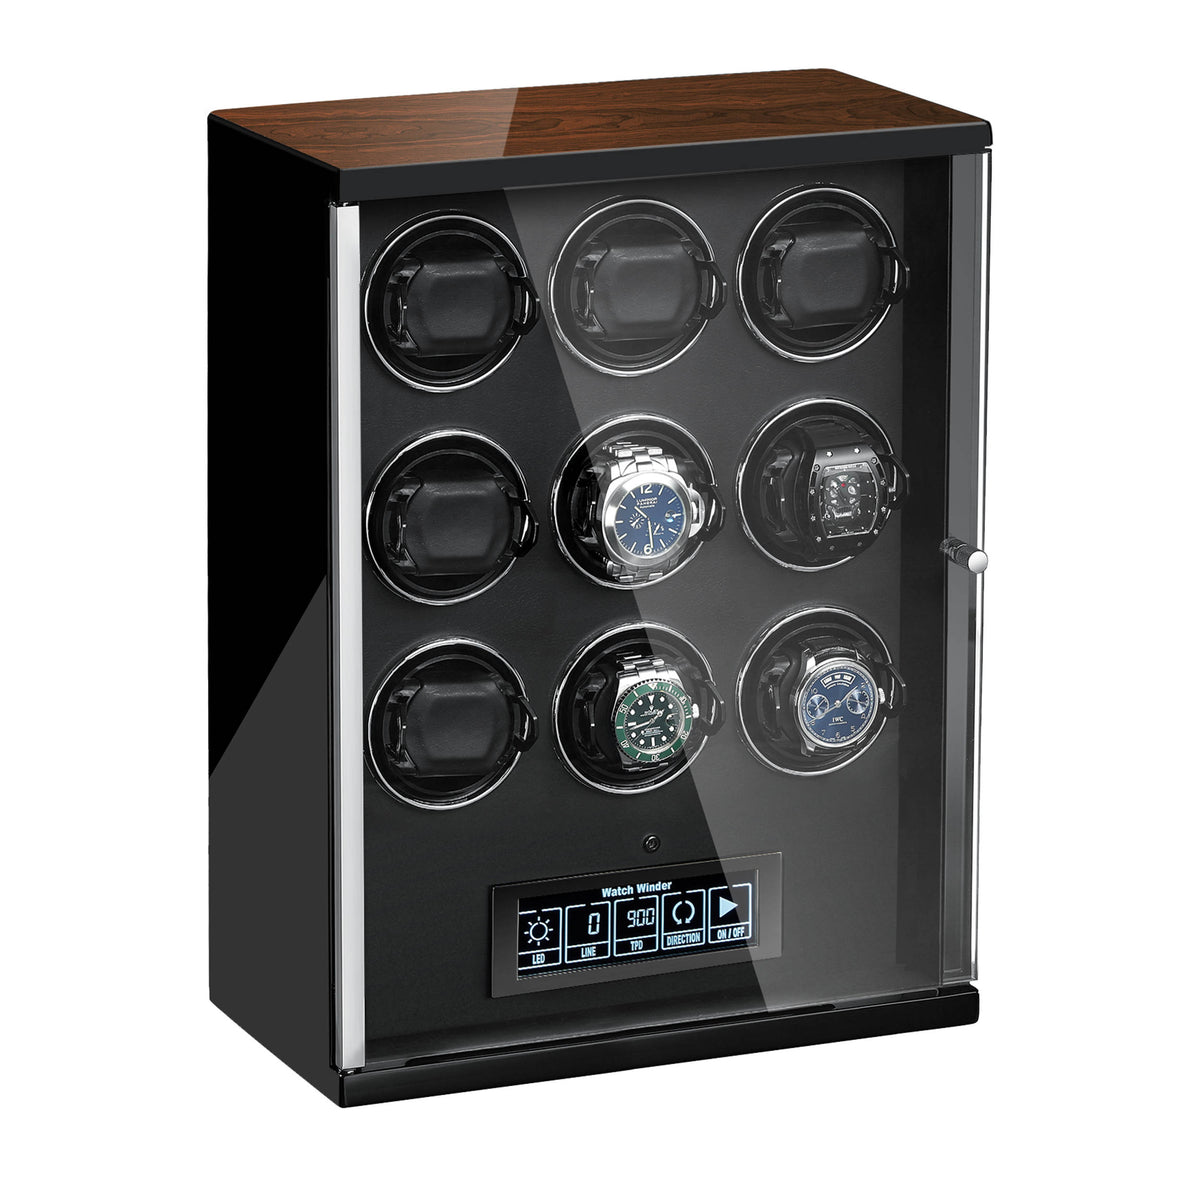 Tempus 9 Watch Winder for Automatic Watches with Touch Screen Technology